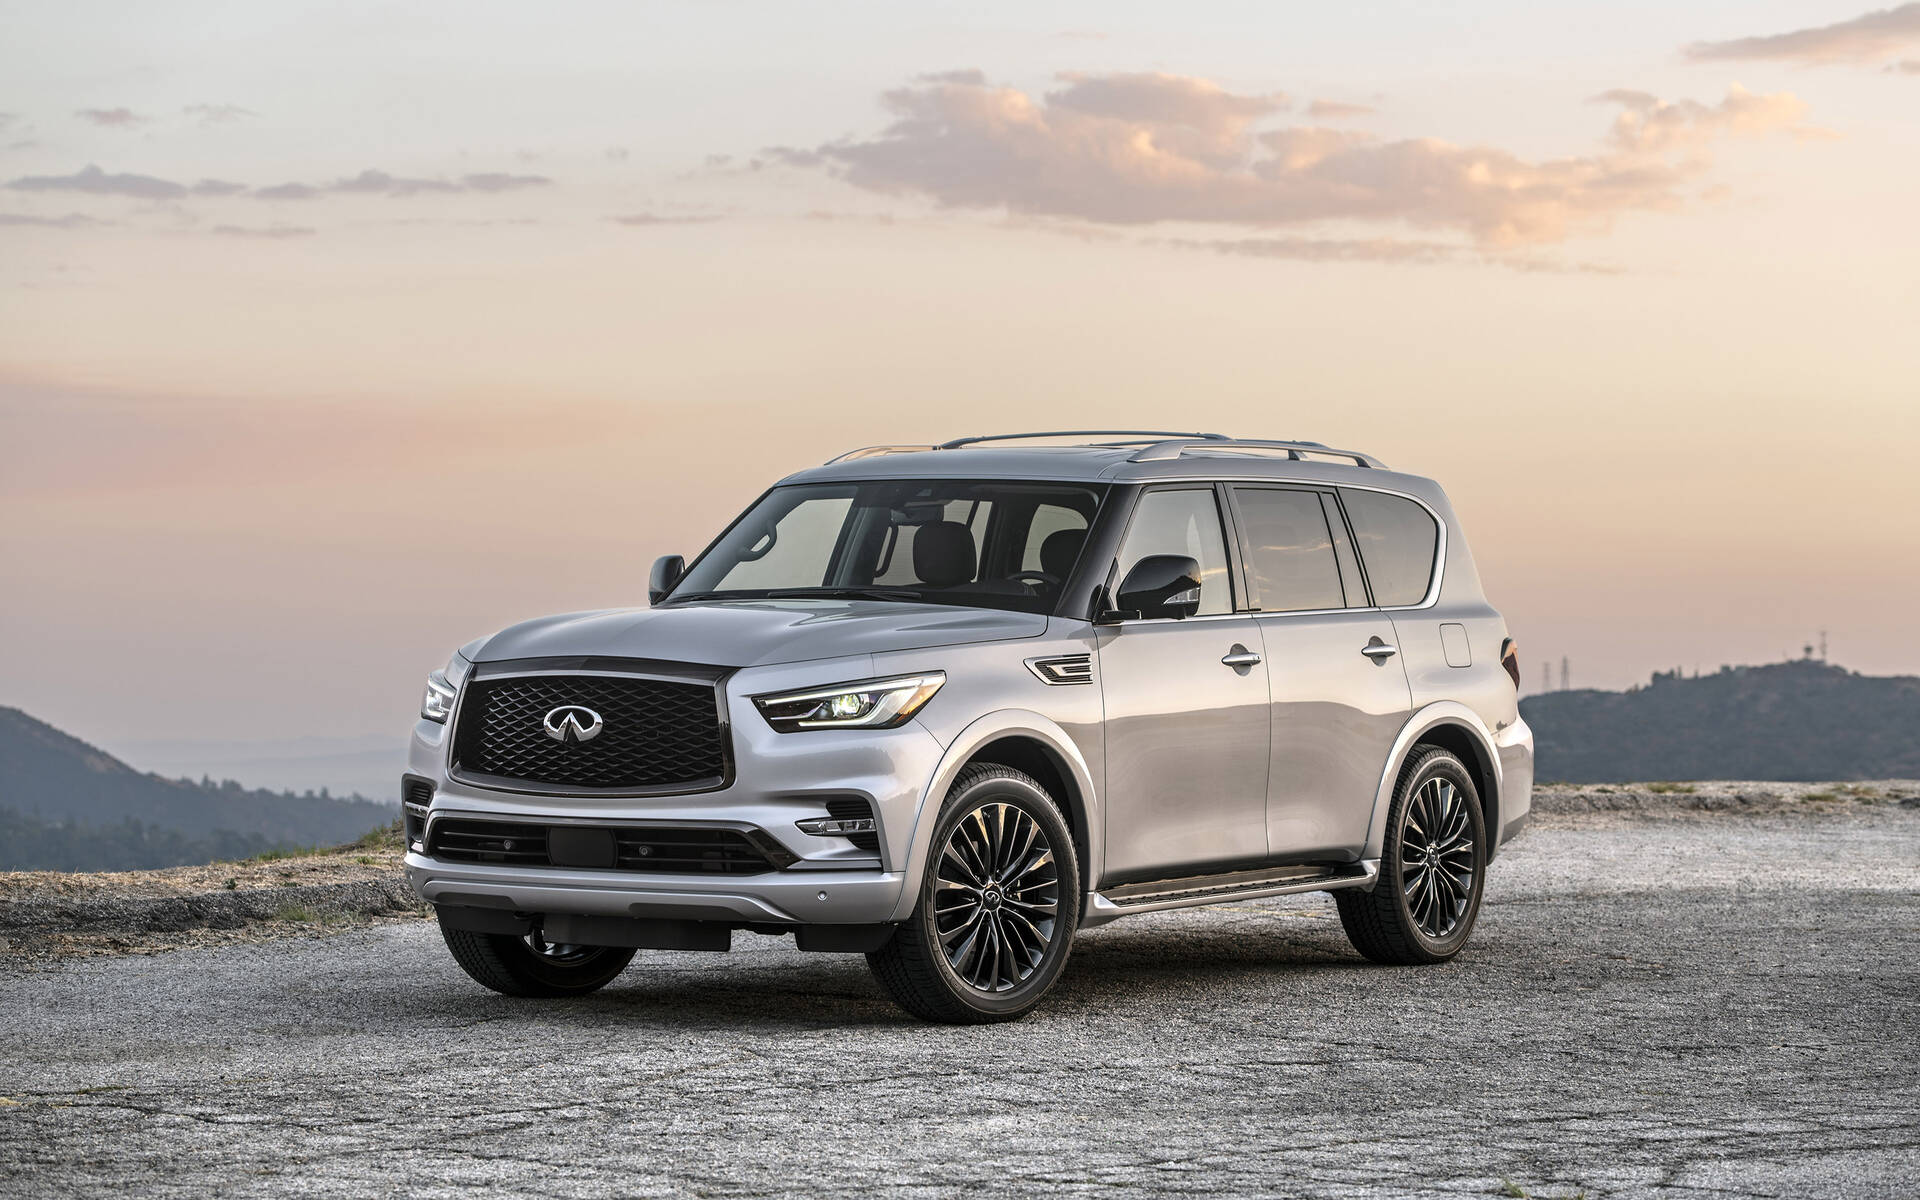 Front angled view of a silver Infiniti QX80